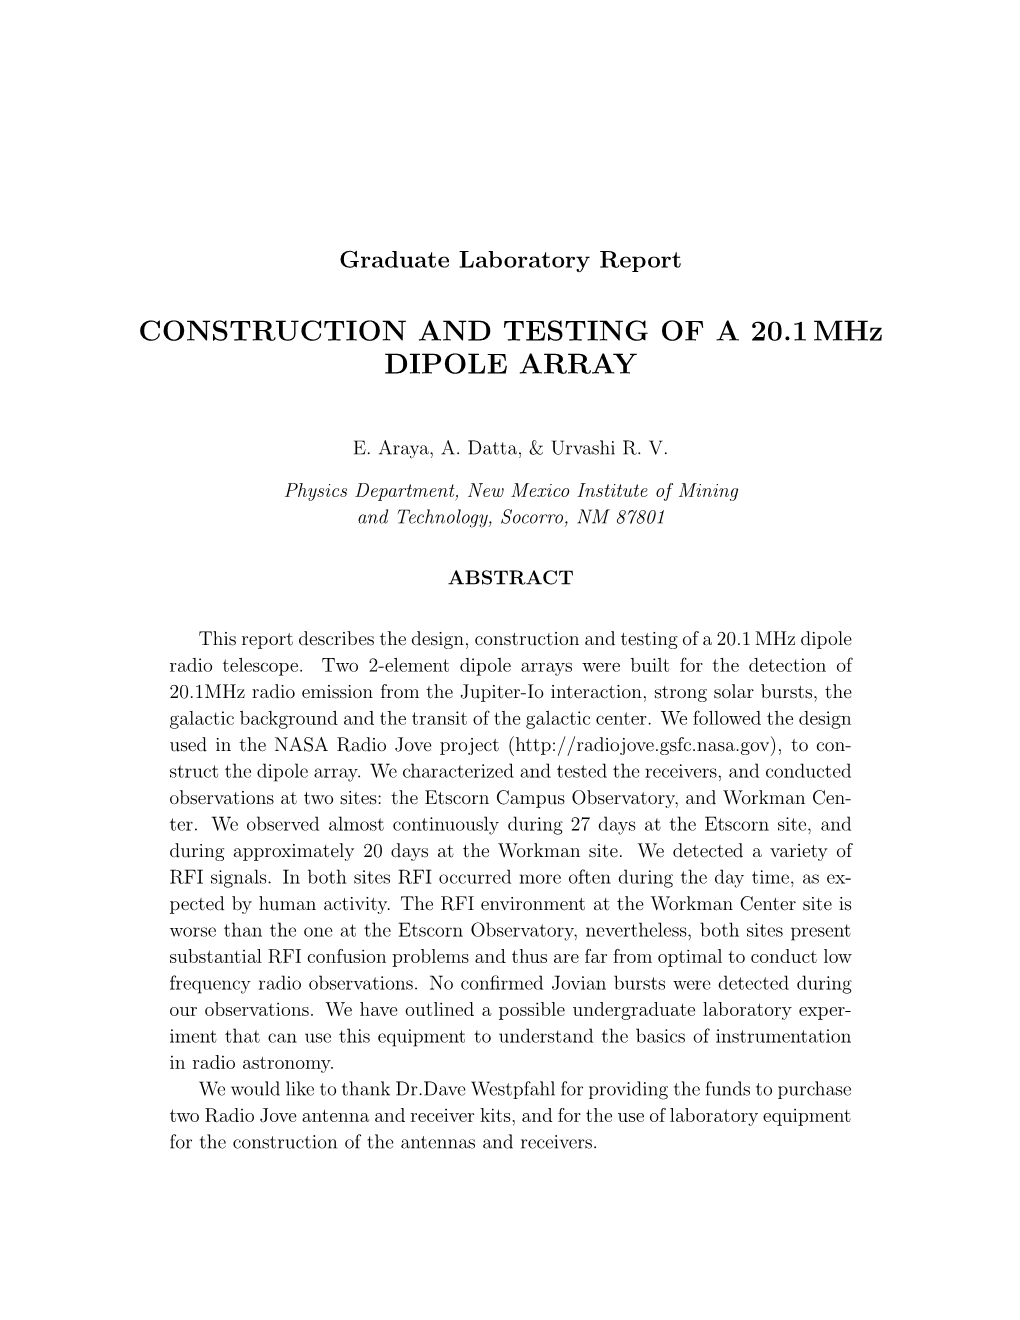 CONSTRUCTION and TESTING of a 20.1Mhz DIPOLE ARRAY